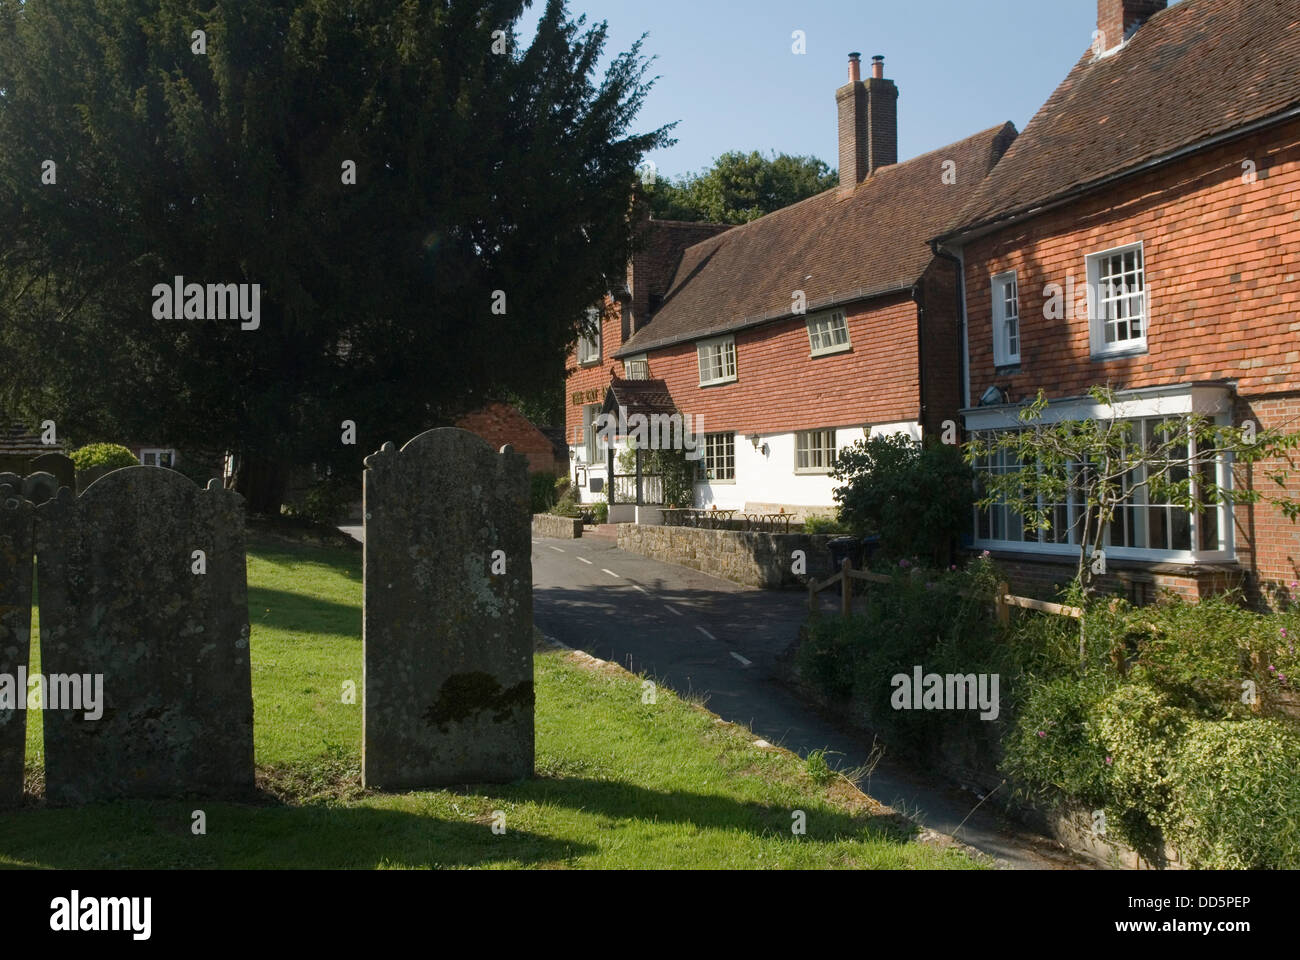 West Hoathy village in Mid Sussex The Cat Inn. England. 2013, 2010s HOMER SYKES Stock Photo